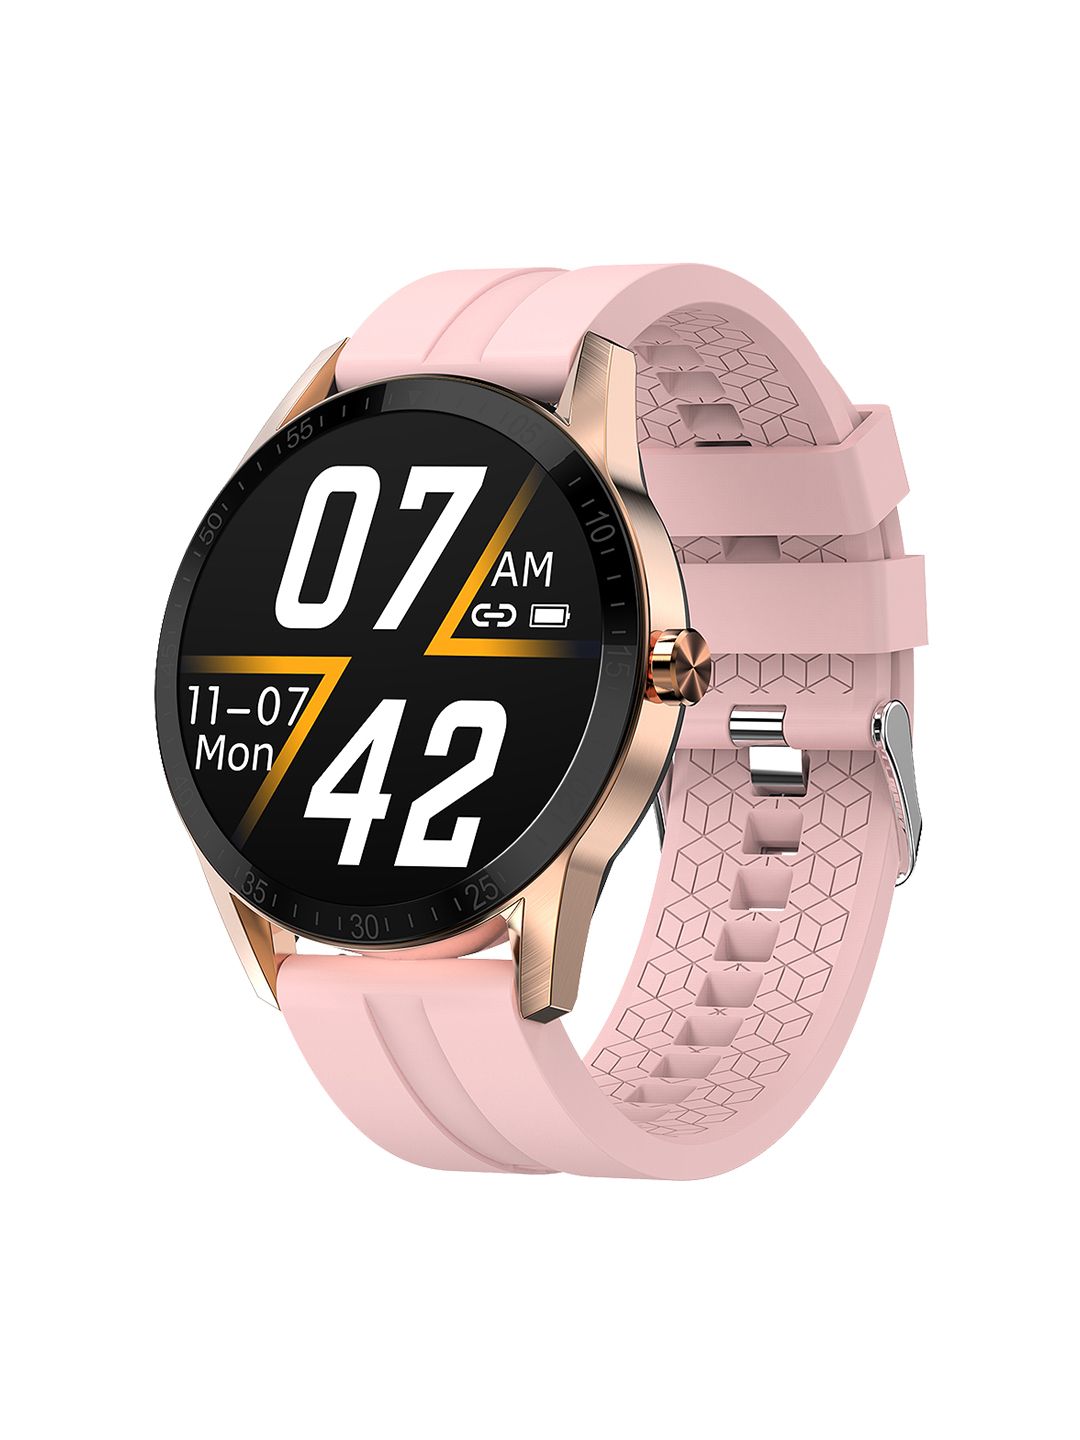 Fire-Boltt Talk Bluetooth Calling Smartwatch - Gold 04BSWAAY#5 Price in India